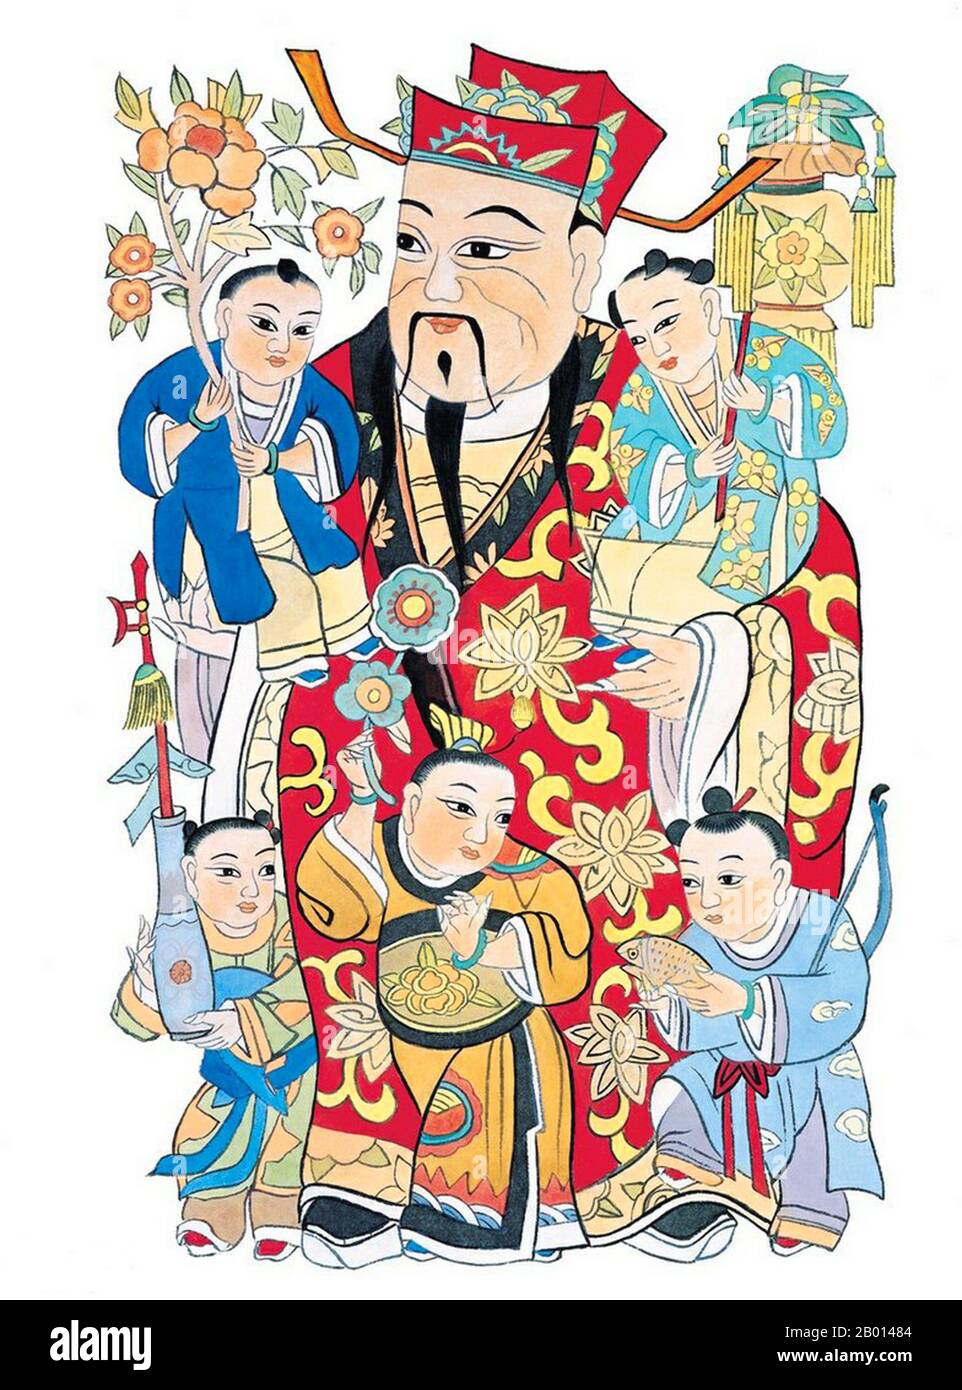 China: Cai Shen (Wade–Giles: Tsai Shen; Cantonese: Choy Sun, Hakka: Choy Sin) is the Chinese God of Wealth or Prosperity. Painting, 20th century.  Cai Shen can also be referred to as Zhao Gongming (Chao Kung-ming) or Bi Gan (Pi-kan). Though Cai Shen began as a Chinese folk hero, later deified and venerated by local followers and admirers, Taoism and Pure Land Buddhism also came to venerate him as a god. Cai Shen's name is often invoked during the Chinese New Year celebrations. He is often depicted riding a black tiger and holding a golden rod. Stock Photo